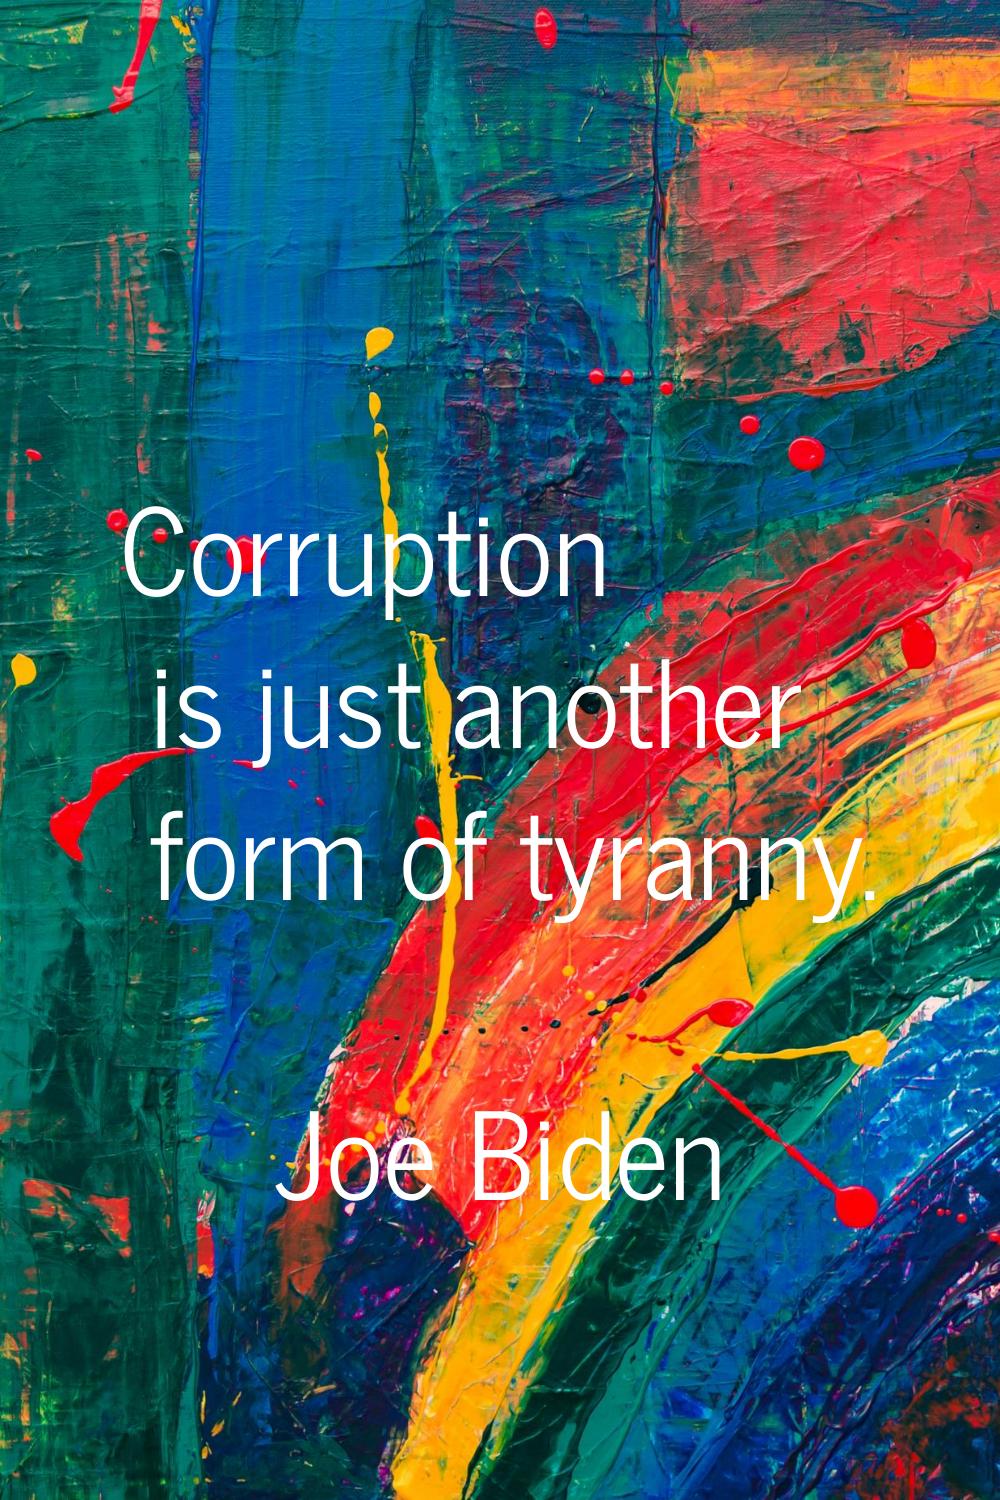 Corruption is just another form of tyranny.